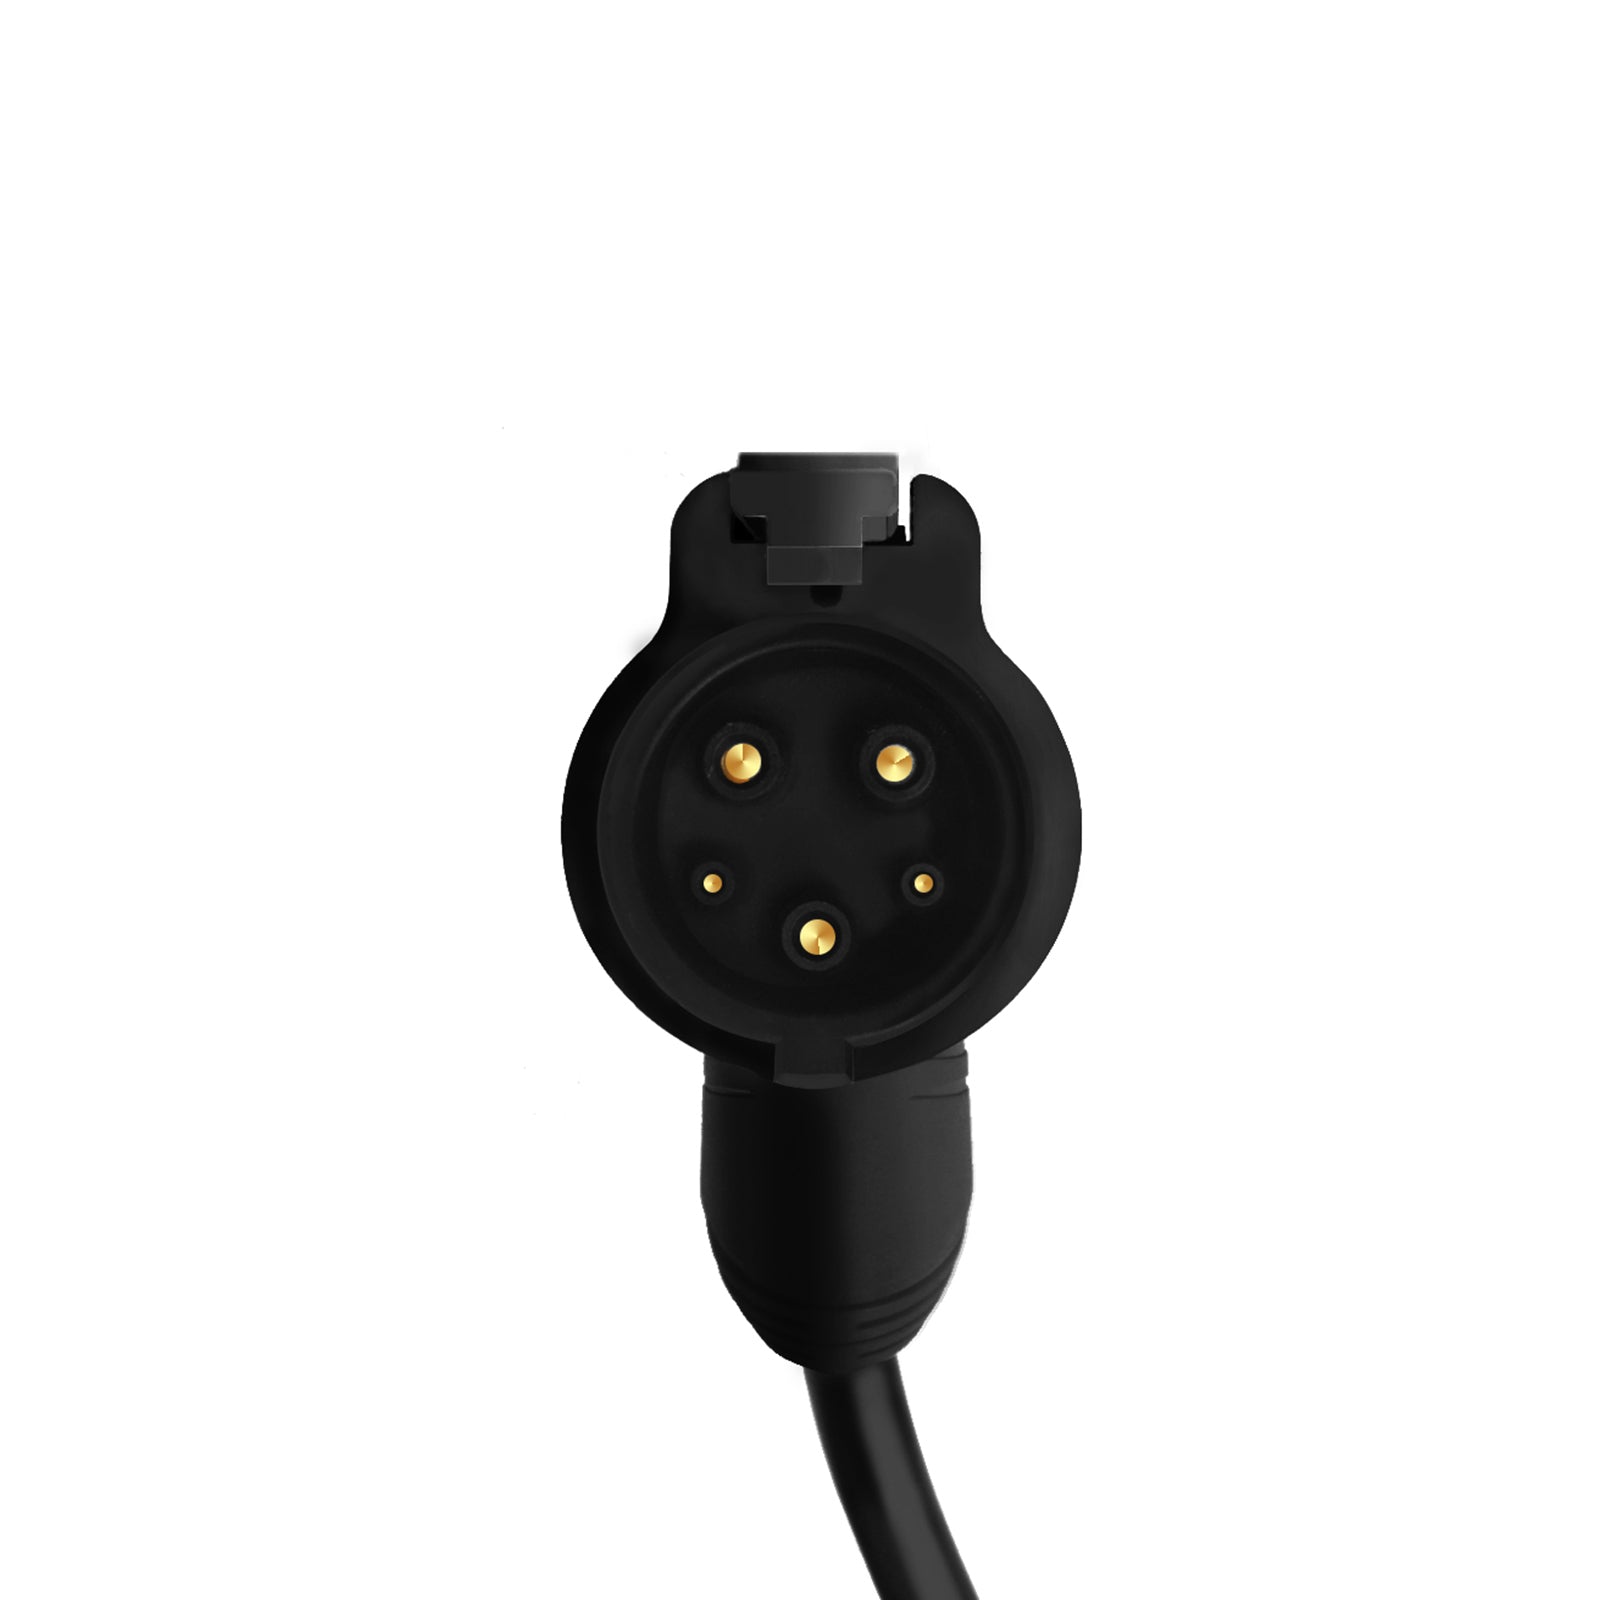 LENZ W401 Home EV Charger Charging Plug made with Copper Alloy Pins connects to all Electric Vehicles